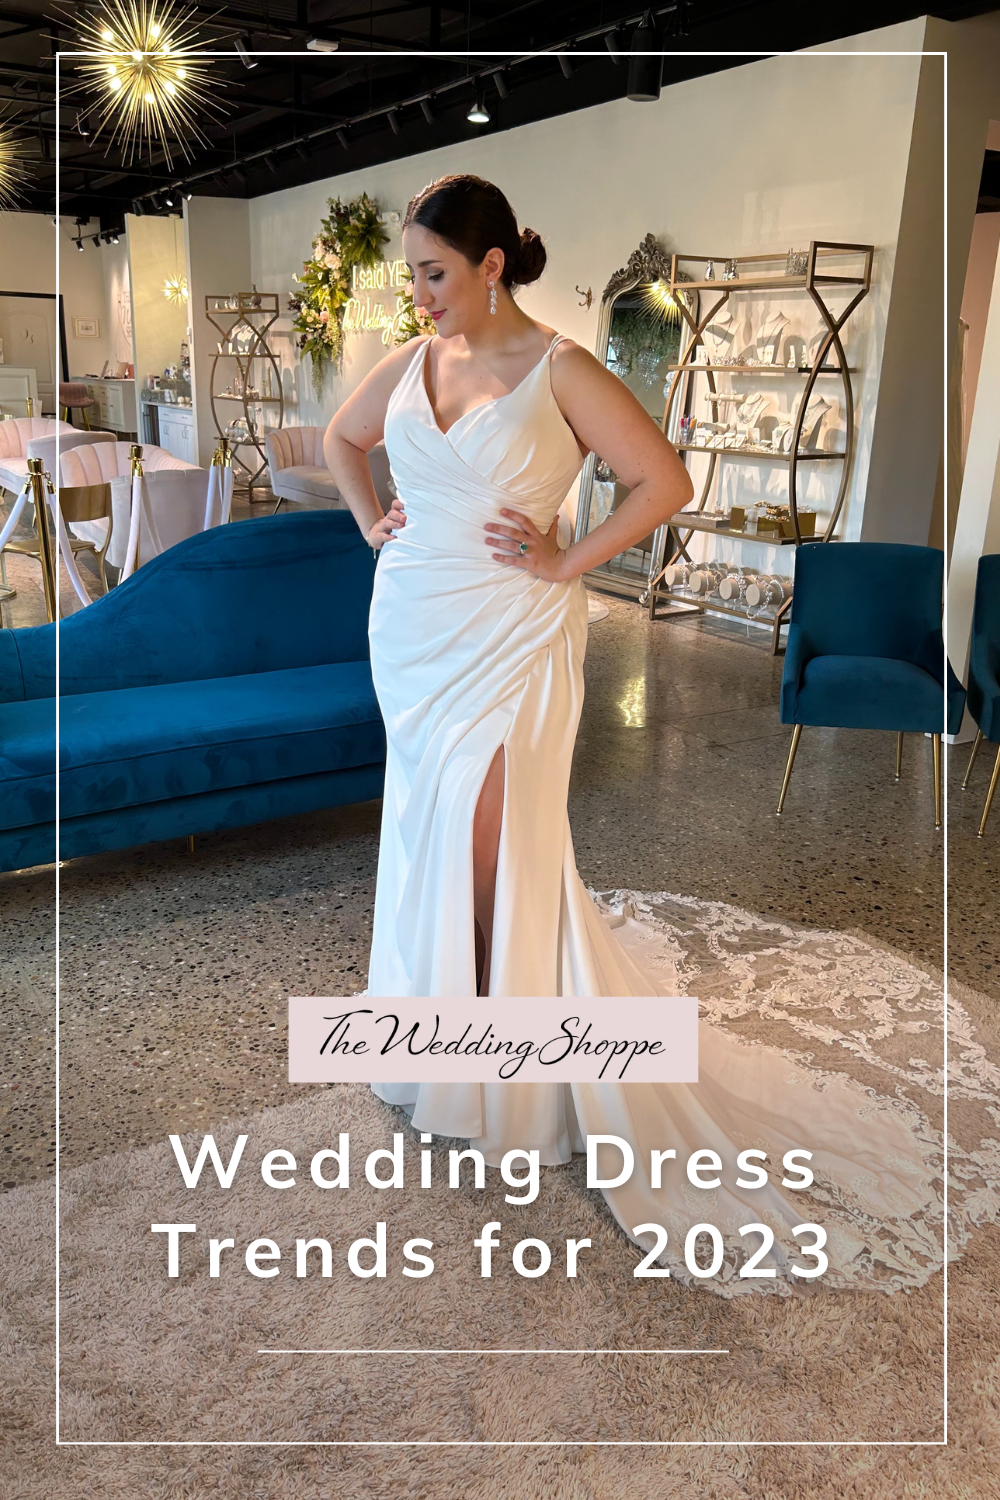 blog post graphic for "Wedding Dress Trends for 2023" from The Wedding Shoppe